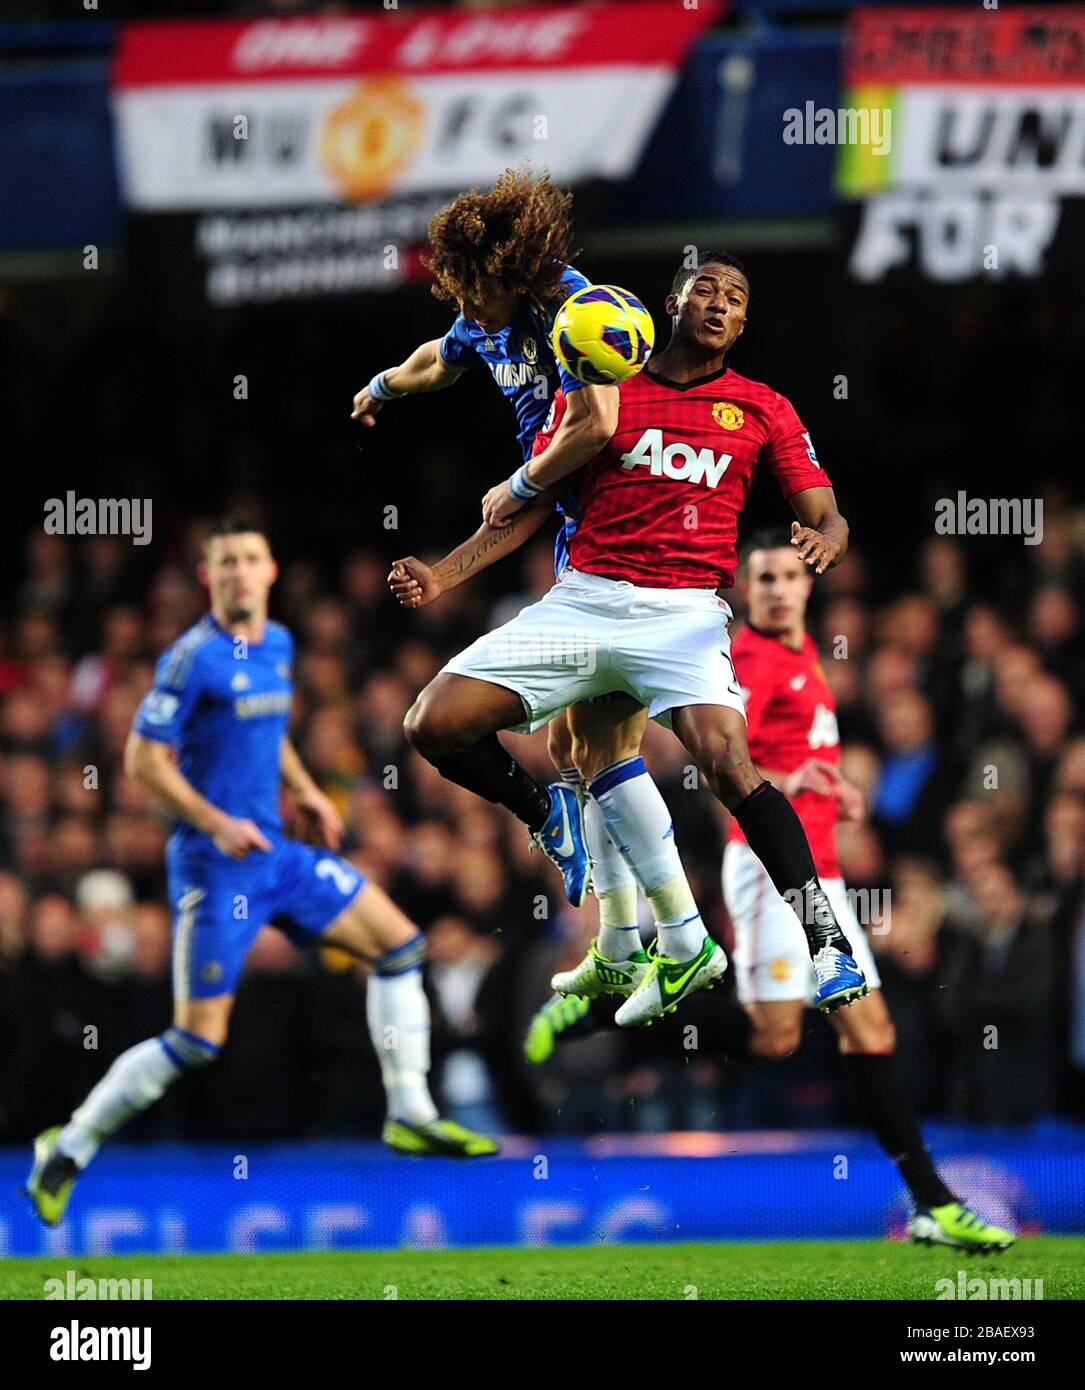 Manchester United's Antonio Valencia (right) and Chelsea's David Luiz battle for the ball in the air Stock Photo